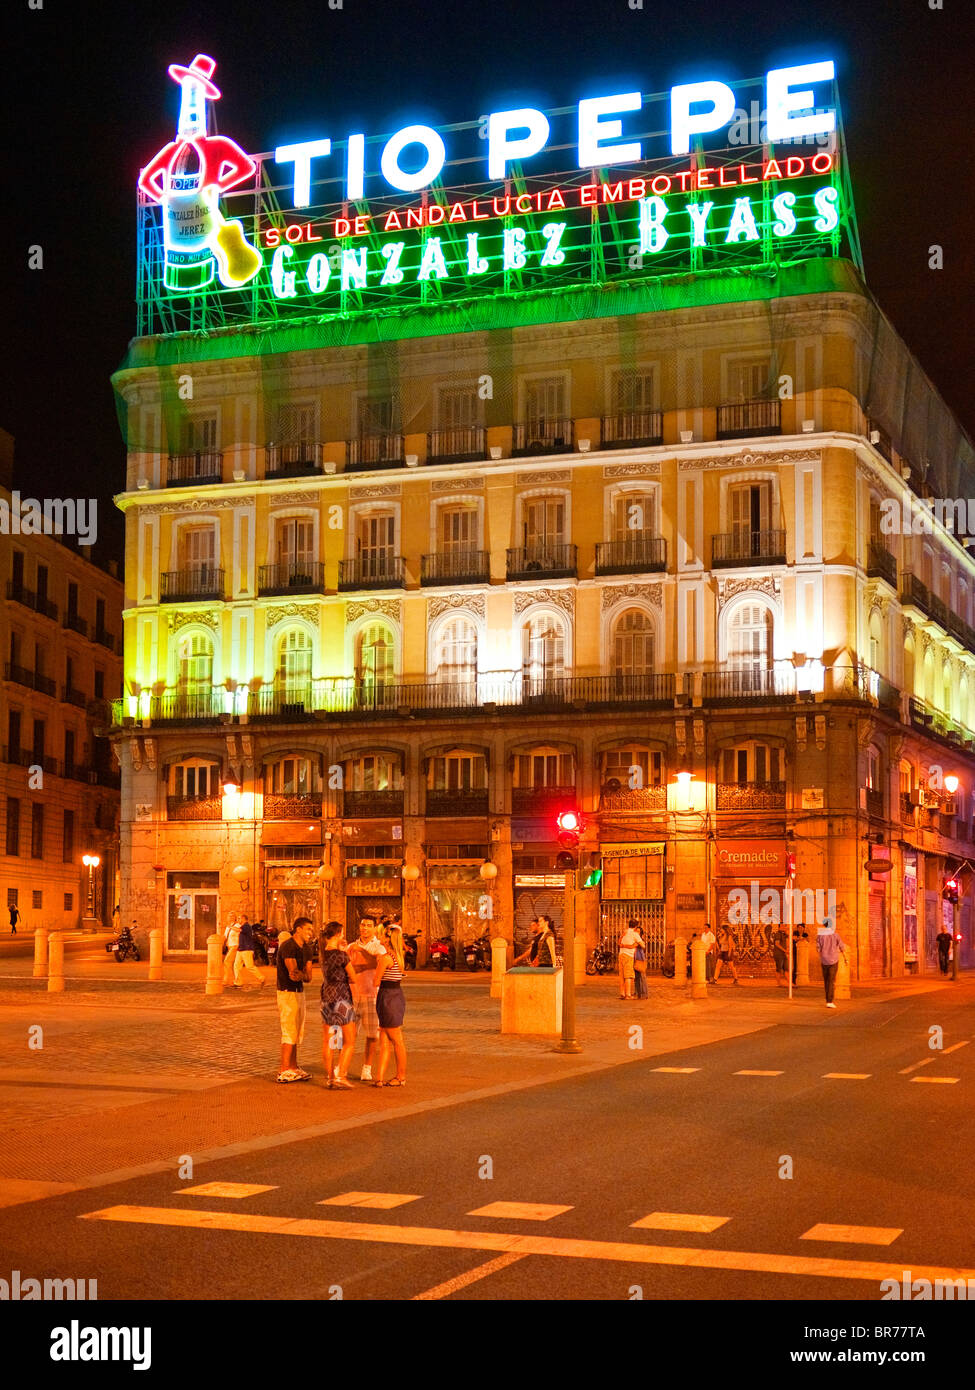 Famous Tio Pepe advertising sign at Puerta del Sol, Madrid, Spain Stock  Photo - Alamy